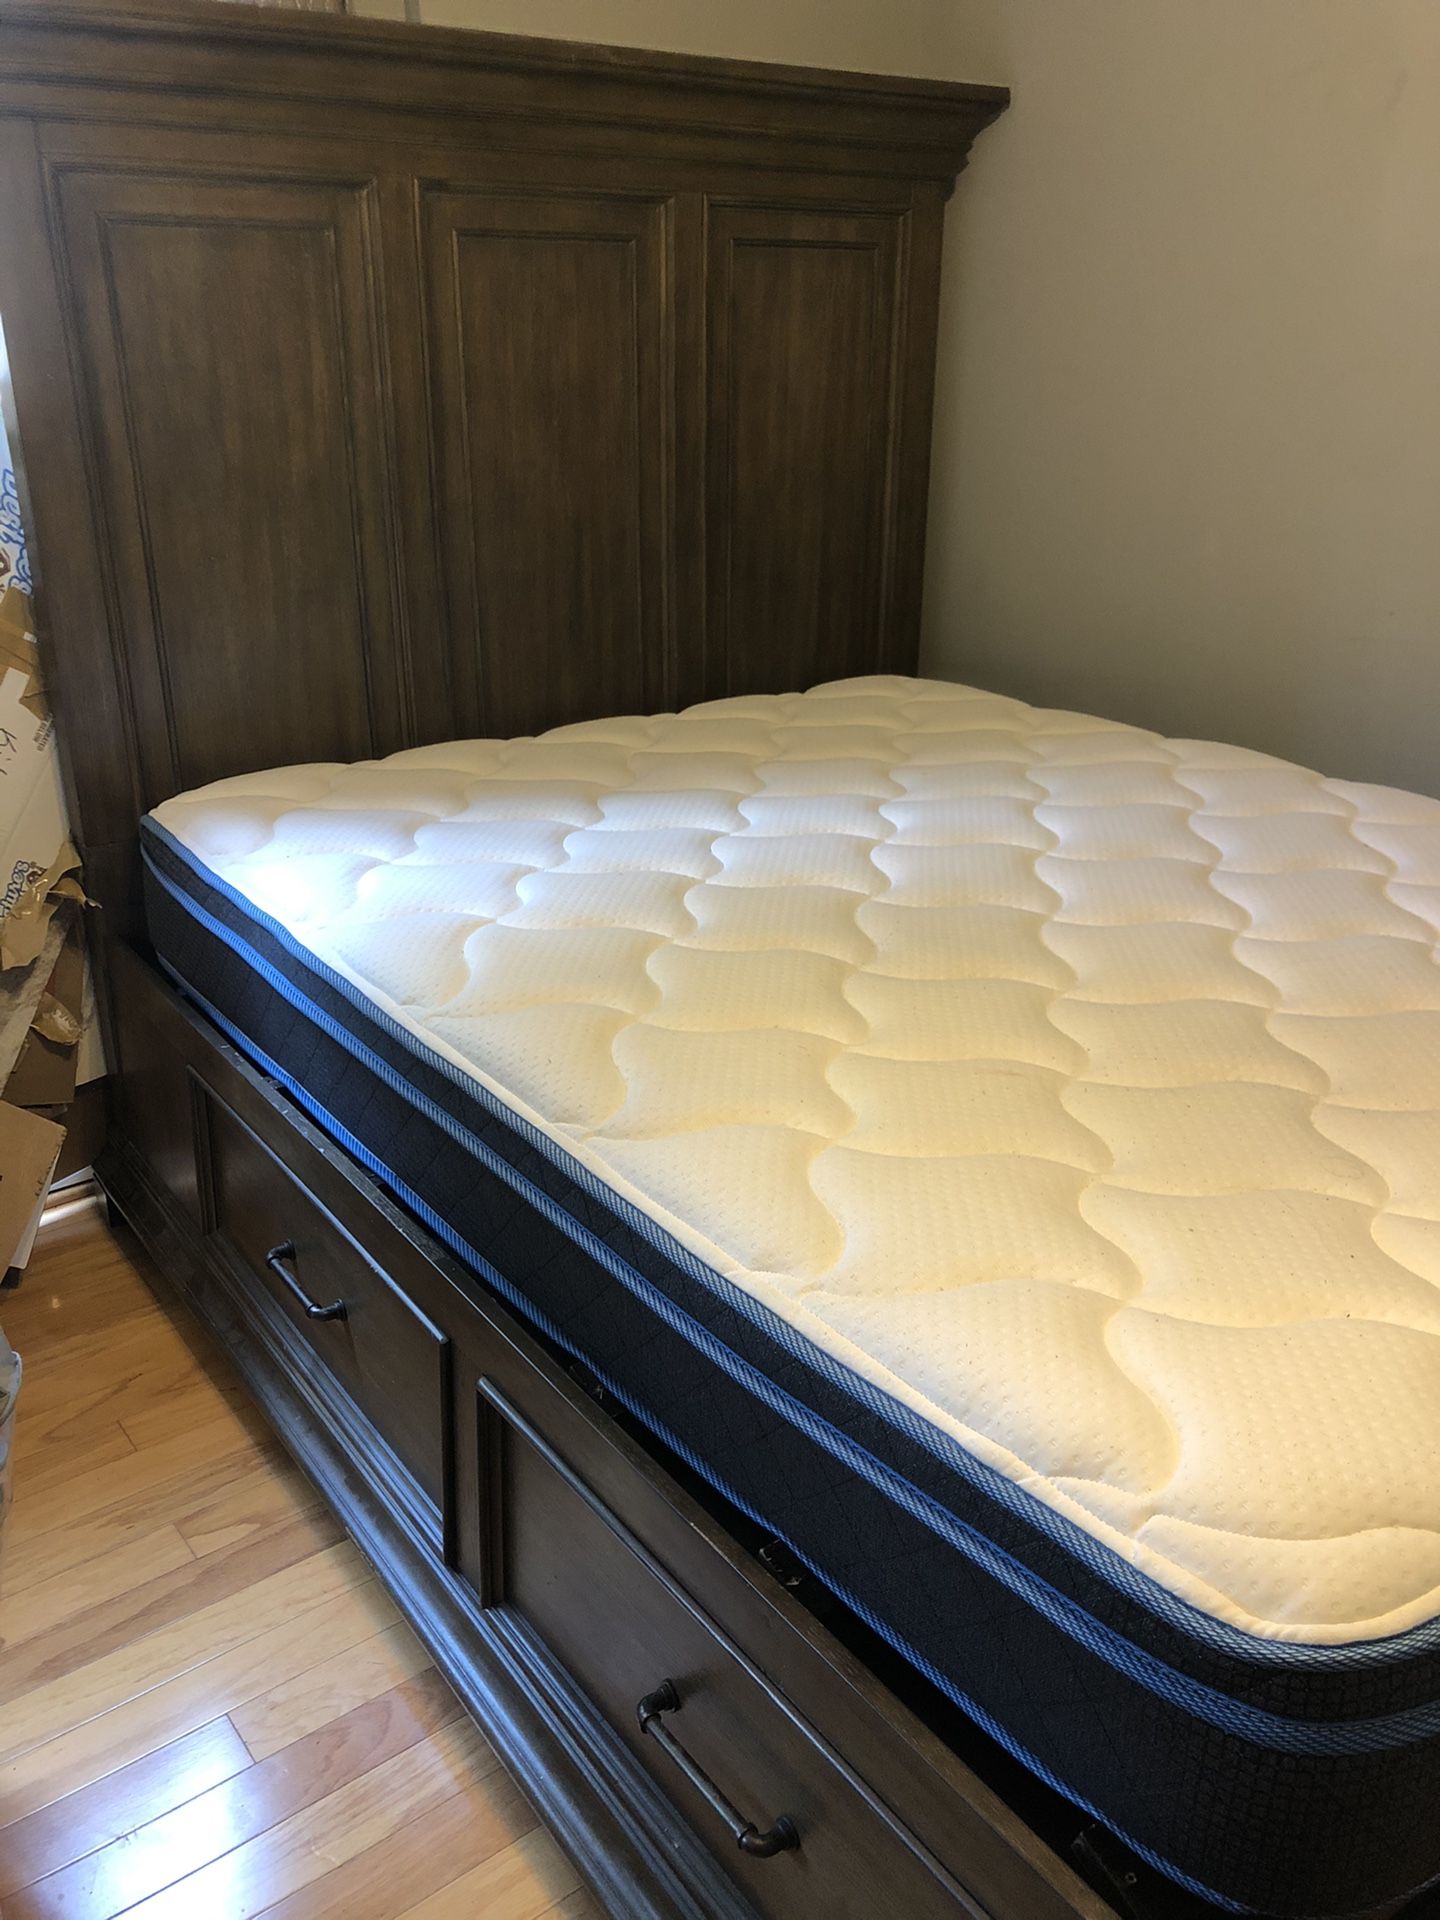 Queen bed frame with built in cabinets